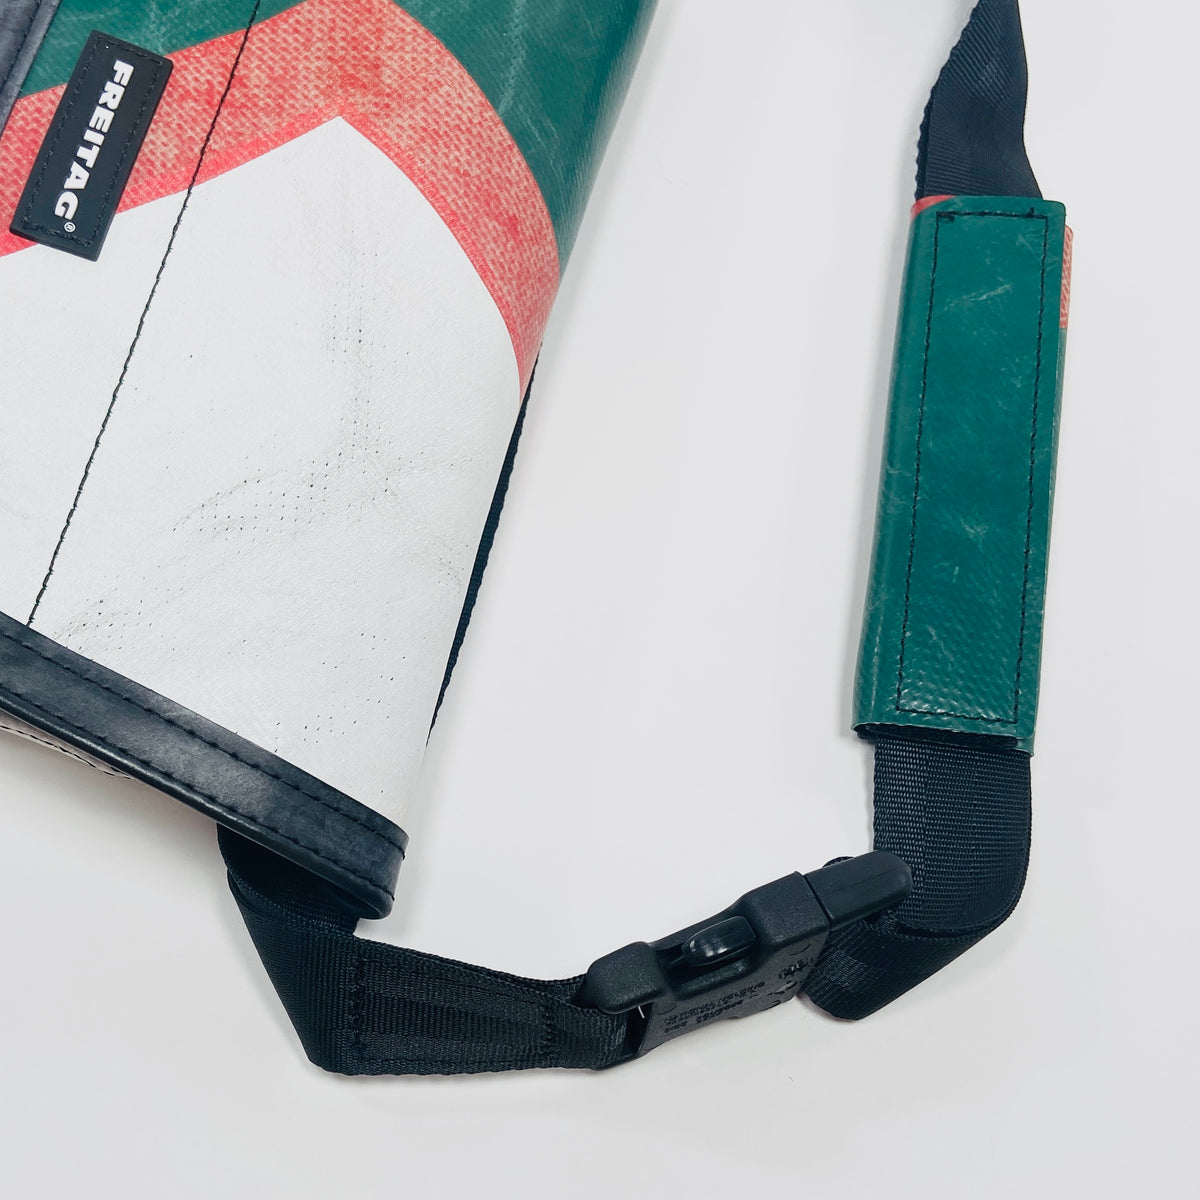 FREITAG F40 - Jamie - Green with red and White